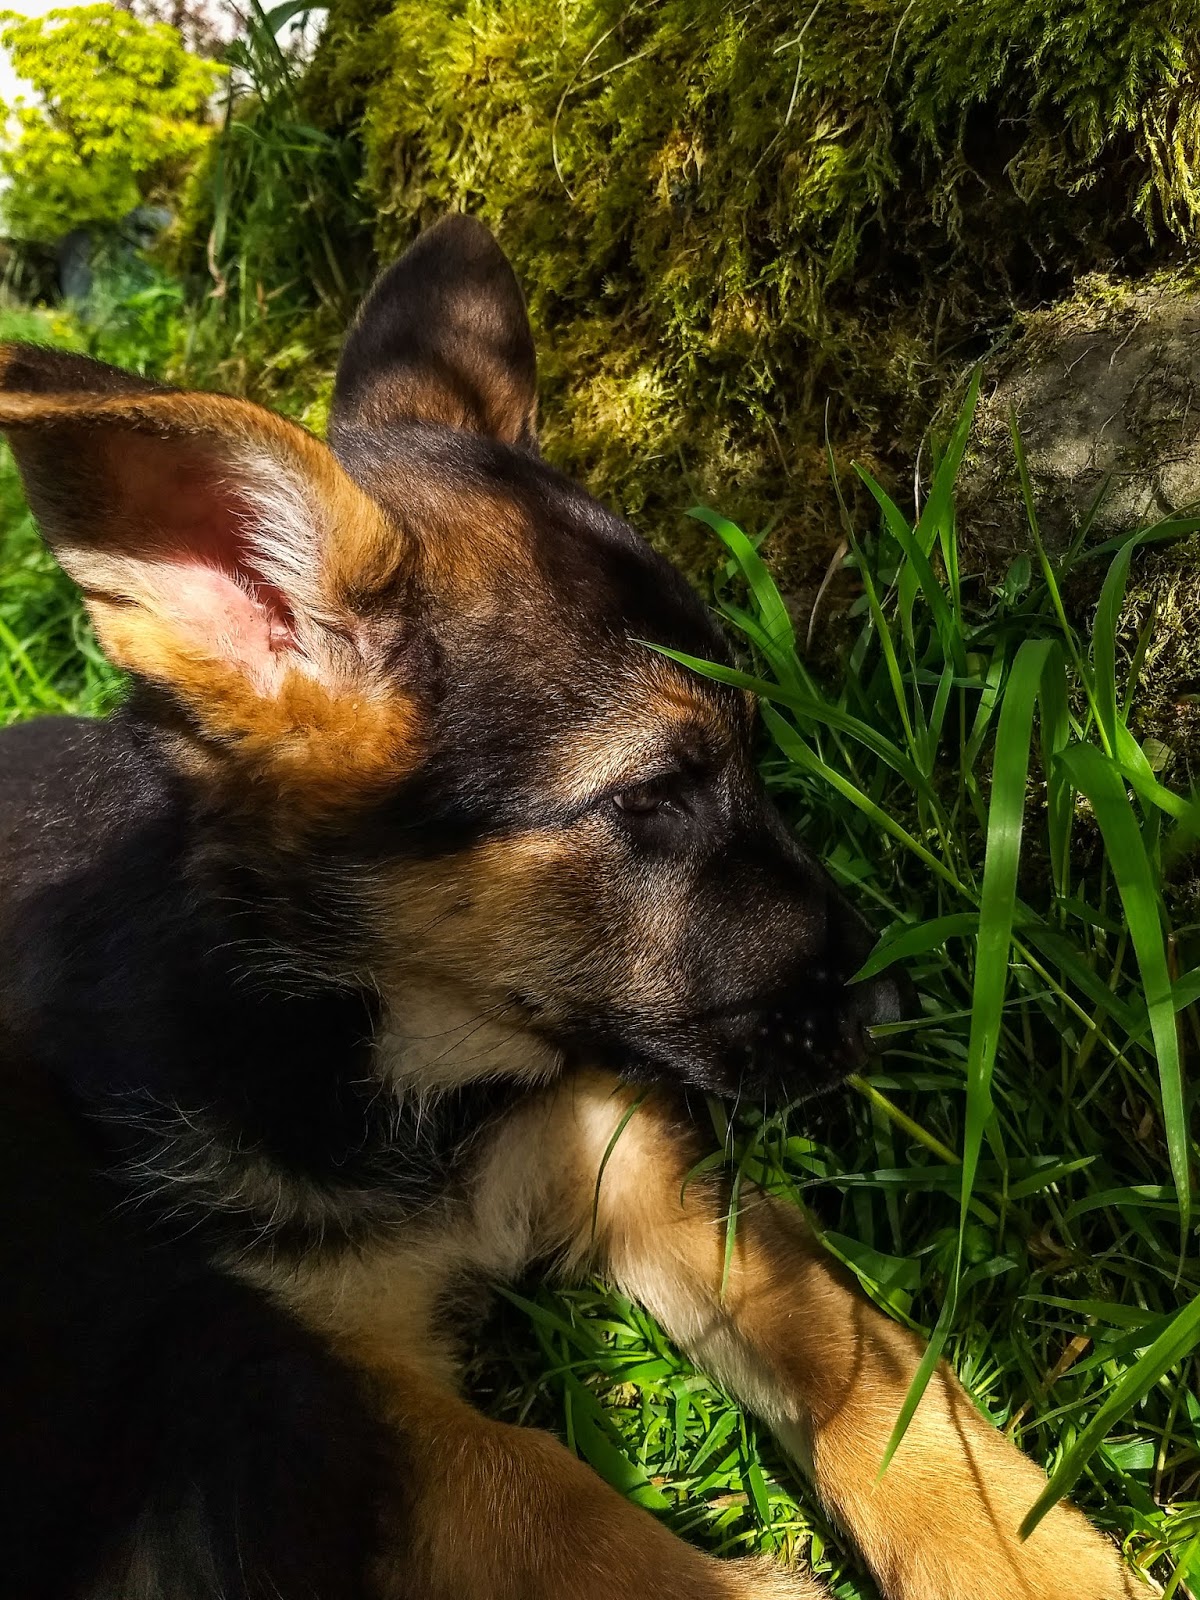 Two month old German Shepherd puppy with ears up and nose buried in the grass.